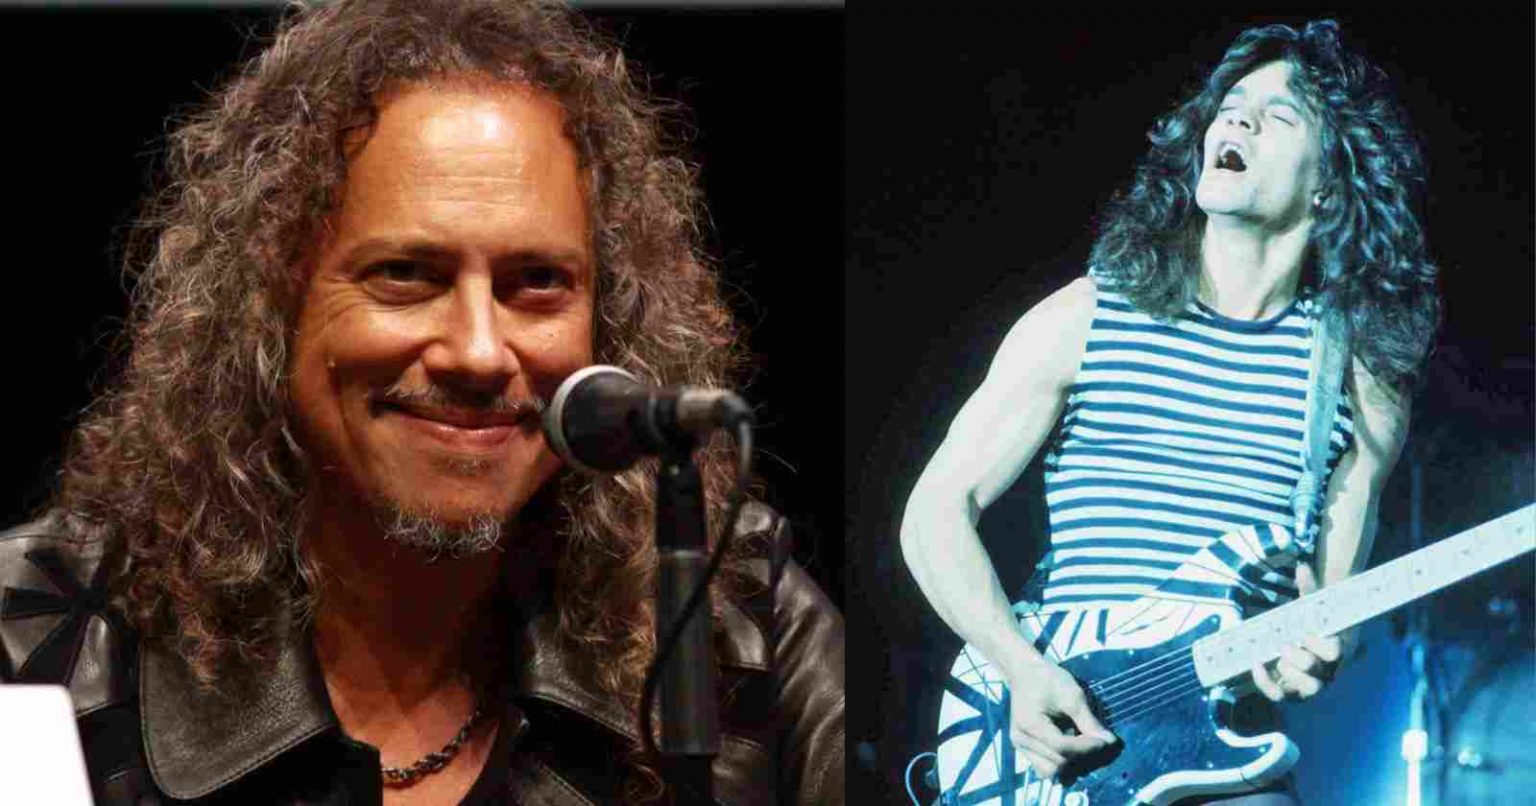 Kirk Hammett answers if he thinks there will be another Eddie Van Halen